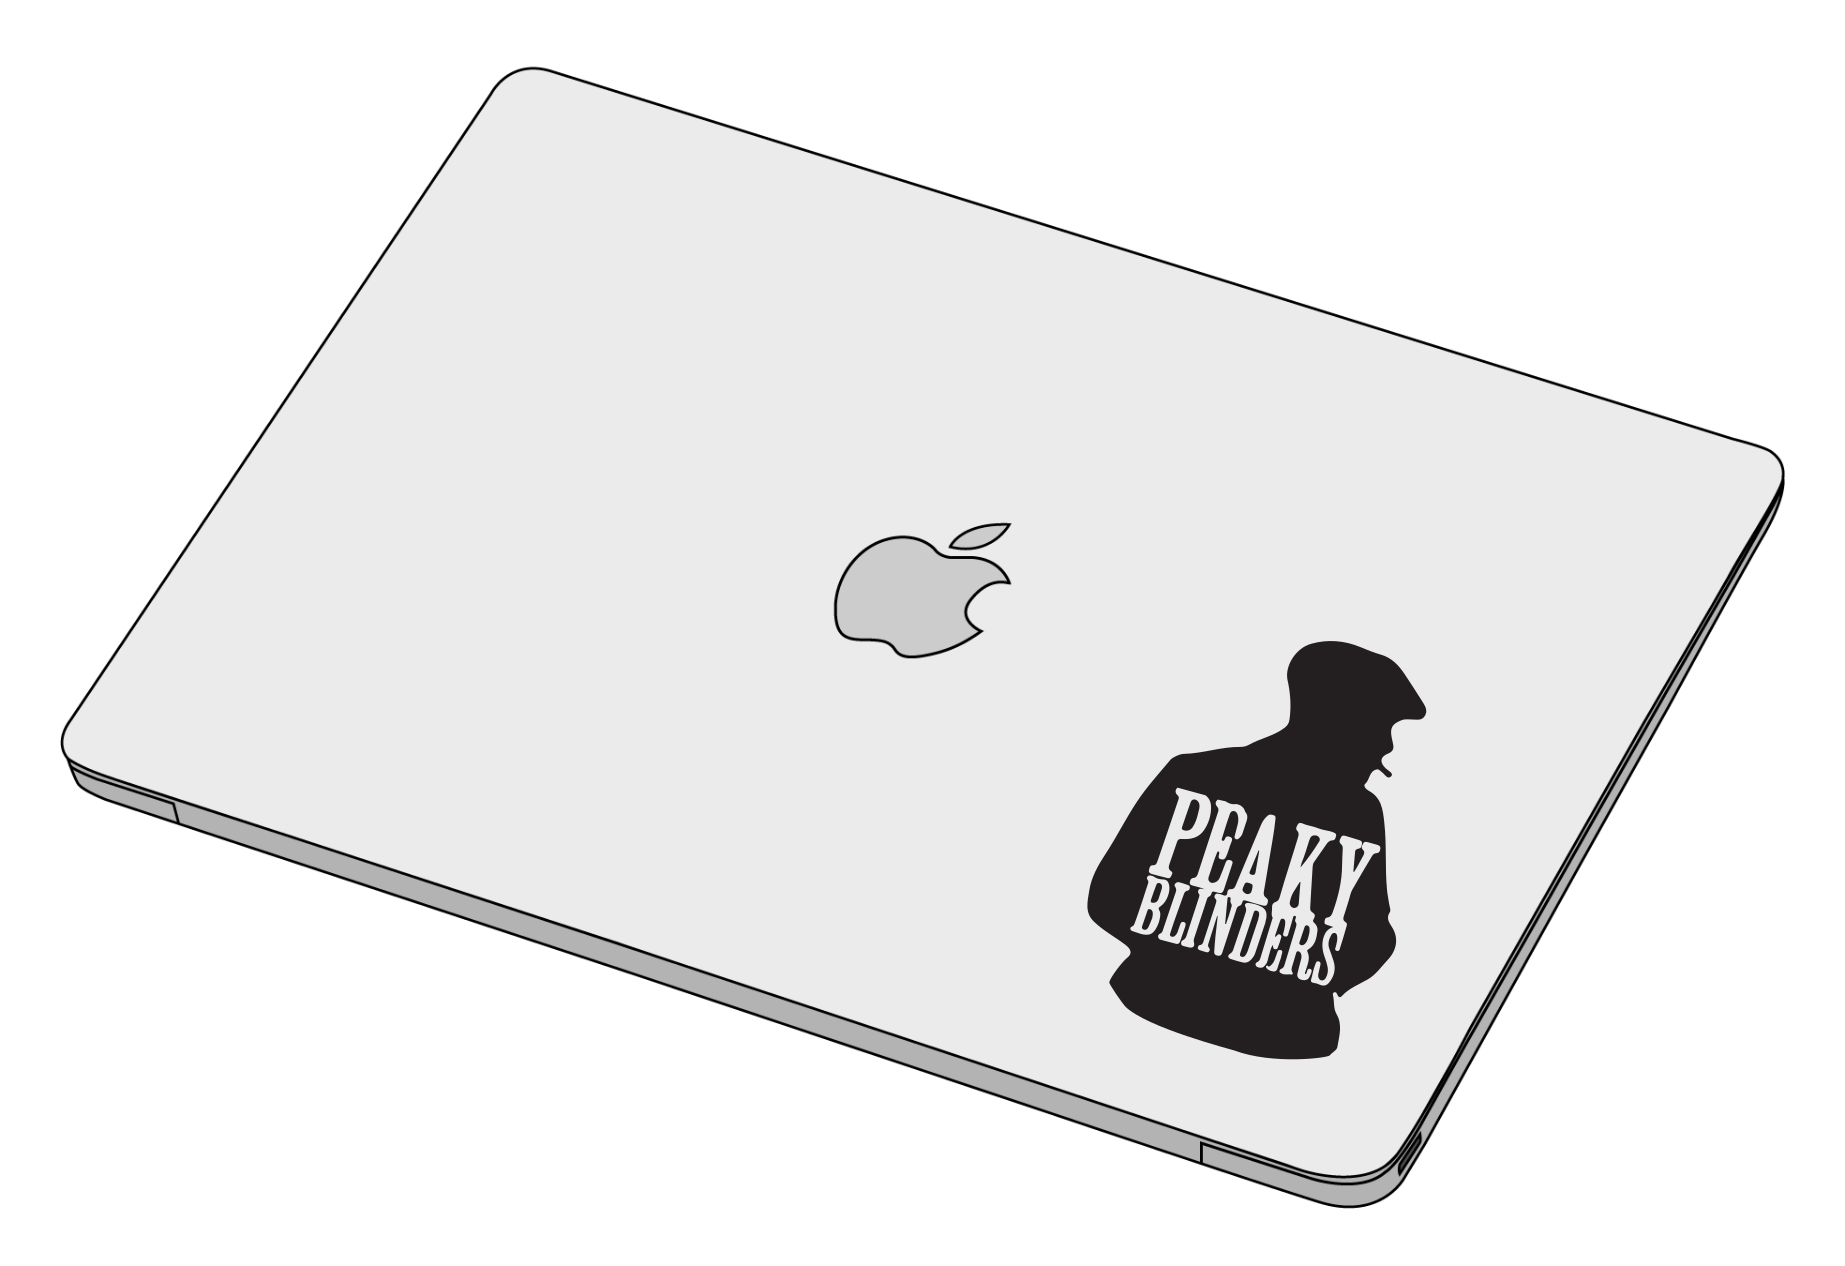 Peaky blinders silhouette sticker-Decal-]-Best laptop stickers in Egypt.-sticktop